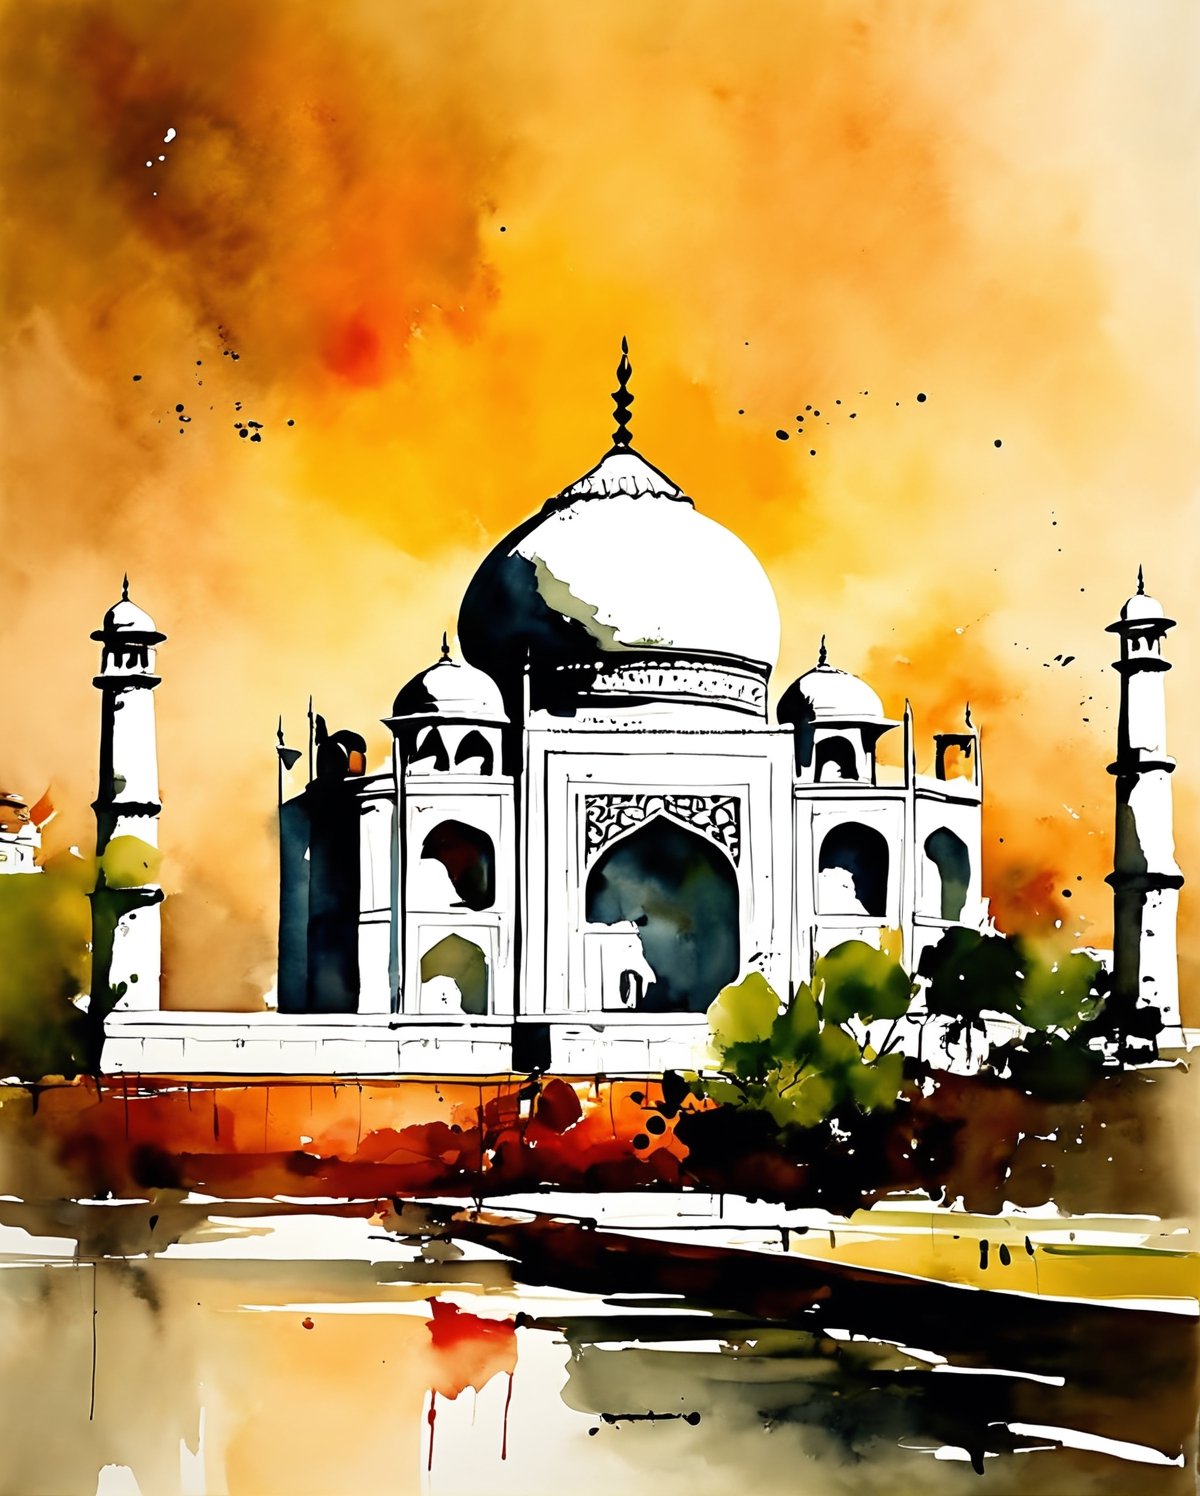 In this artistic endeavor, fuse the traditional Chinese ink wash technique with the stylistic essence of Wu Guanzhong, blending it seamlessly with Western artistic concepts to depict the iconic Taj Mahal in a contemporary artistic representation. Embrace the fluidity and expressive brushwork characteristic of Chinese ink painting, capturing the intricate details and architectural splendor of the Taj Mahal with bold strokes and dynamic composition. Integrate Western painting elements such as perspective, light, and shadow to add depth and dimension to the scene, enhancing the majestic presence of the monument. Focus on capturing the timeless beauty and cultural significance of the Taj Mahal, infusing it with a sense of poetic tranquility and universal resonance. Let the synthesis of Eastern and Western influences create a captivating visual narrative that transcends cultural boundaries and celebrates the enduring legacy of artistic expression.,ink 